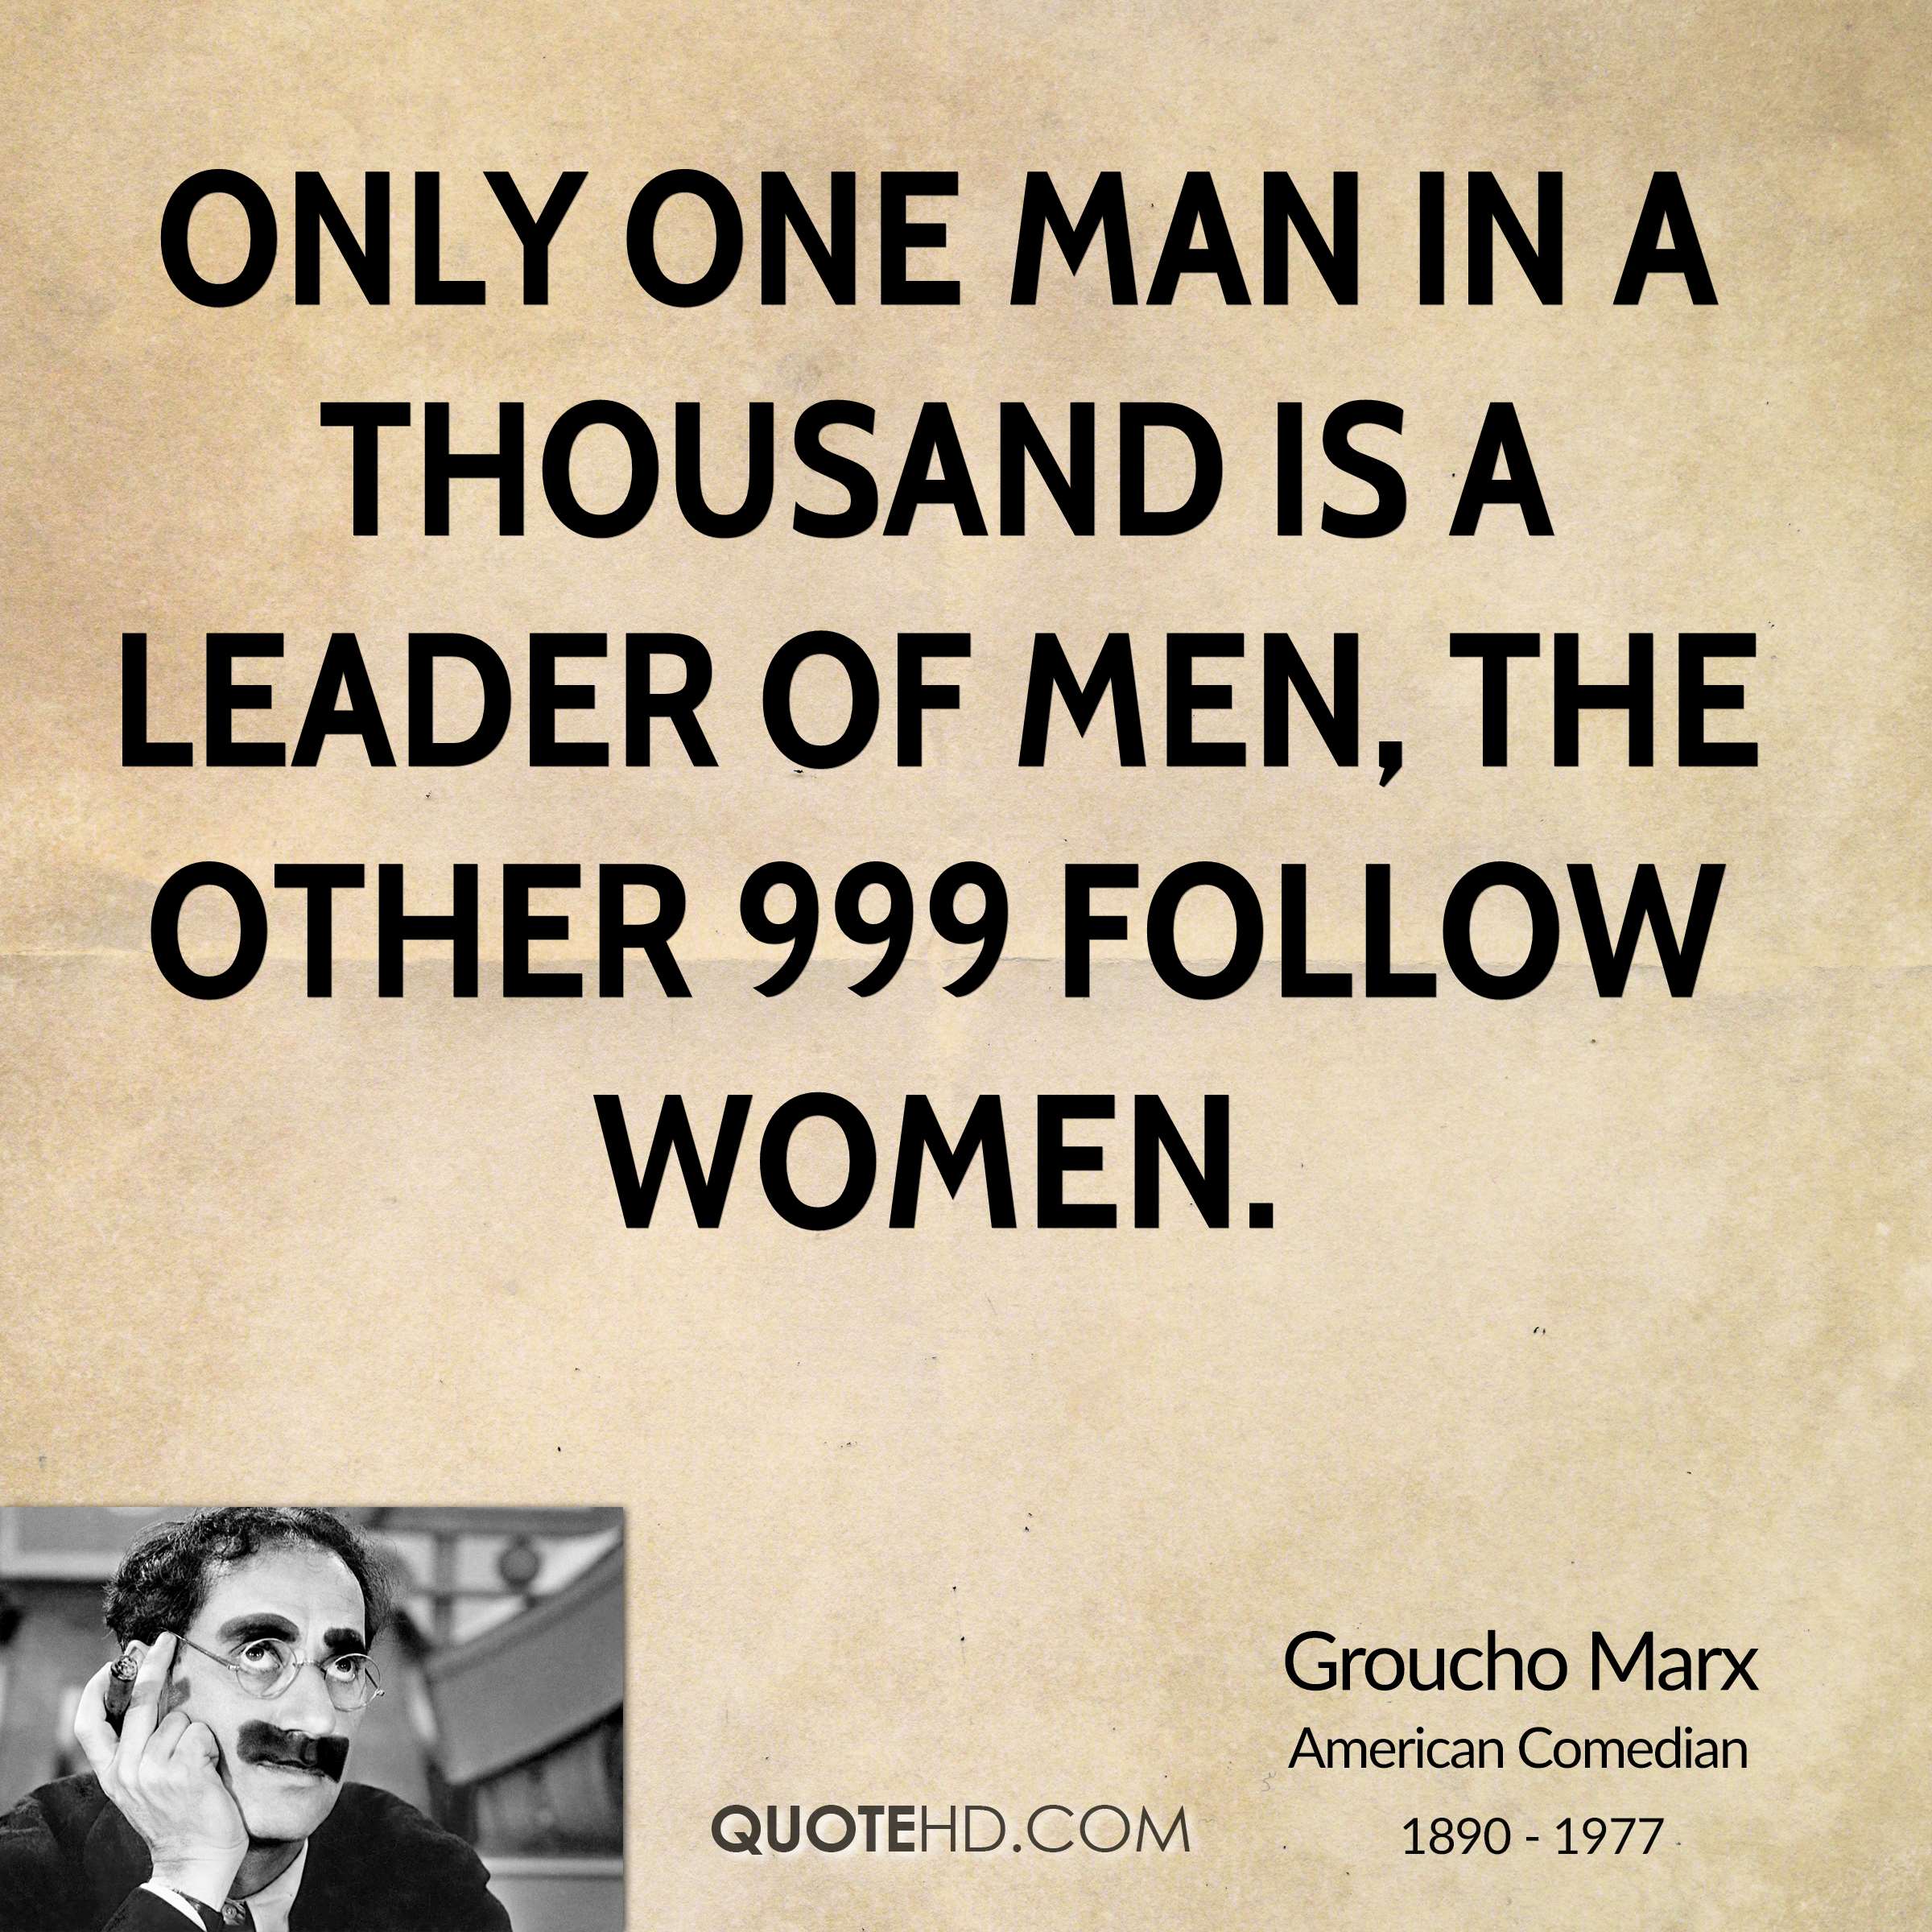 Only one man in a thousand is a leader of men -- the other 999 follow women. Groucho Marx